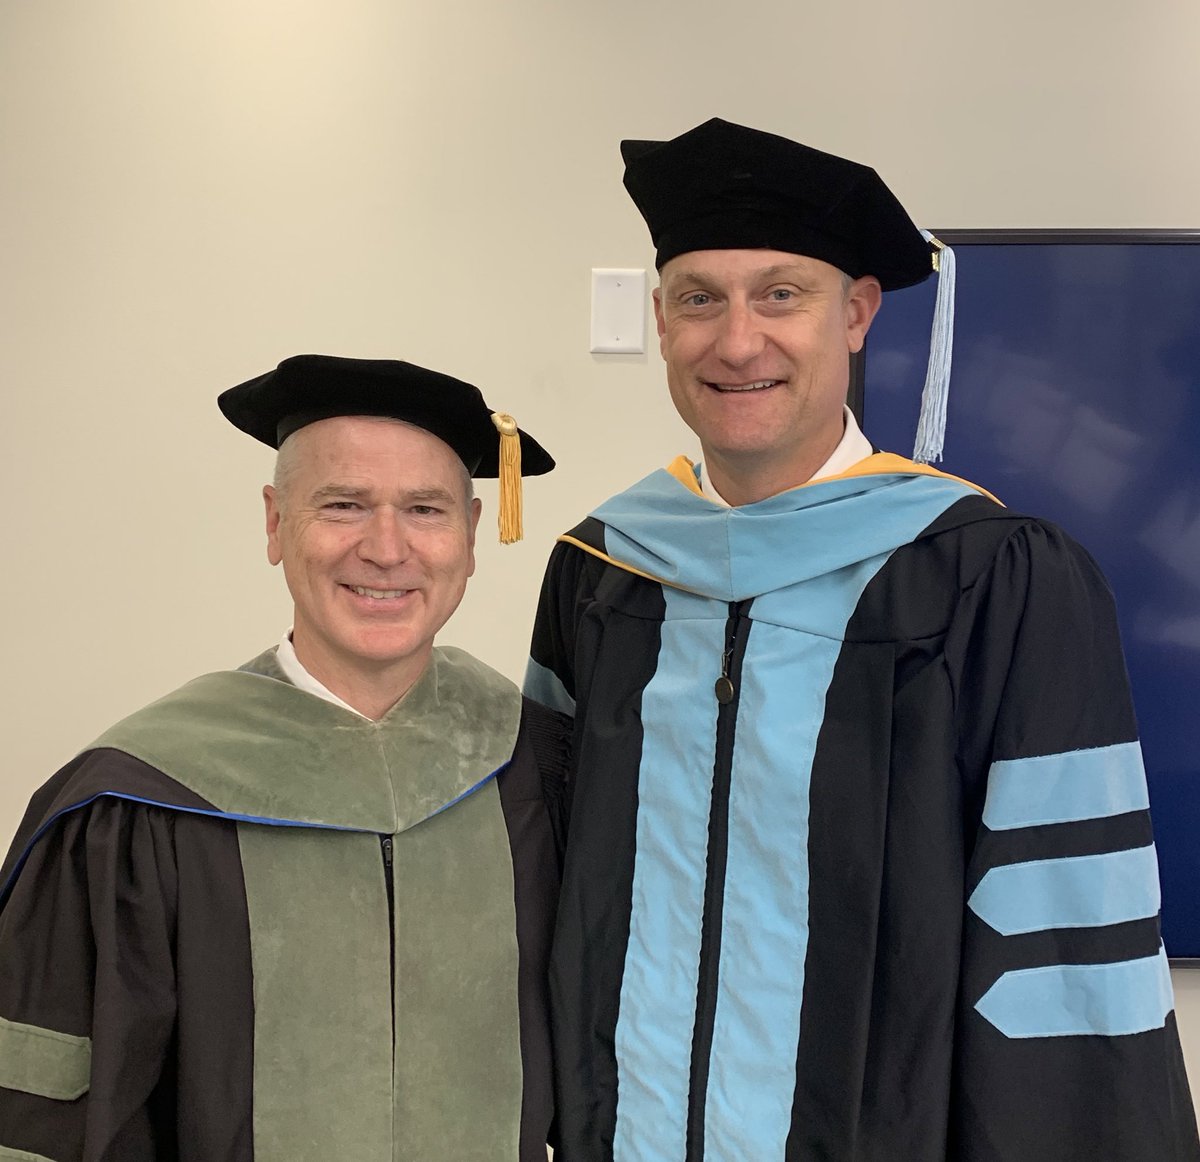 Honored to celebrate @SouthPiedmontCC graduation with one of my mentors Dr. Travis Teague.